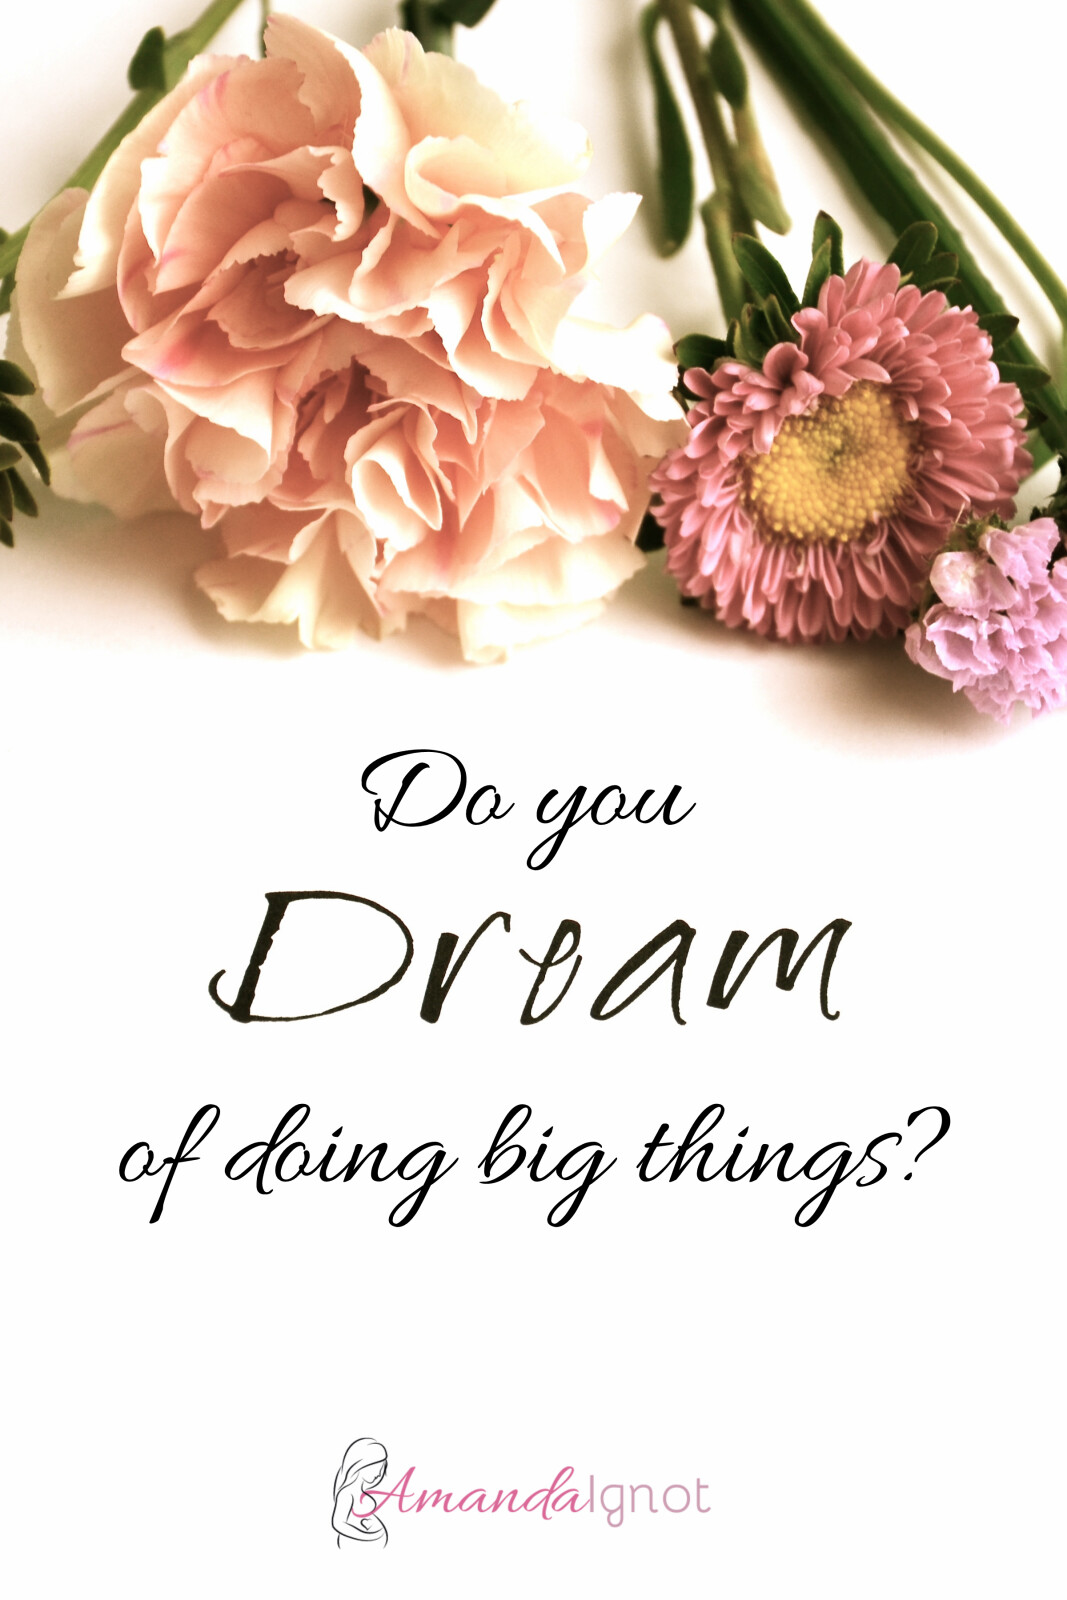 Do you dream of doing big things?